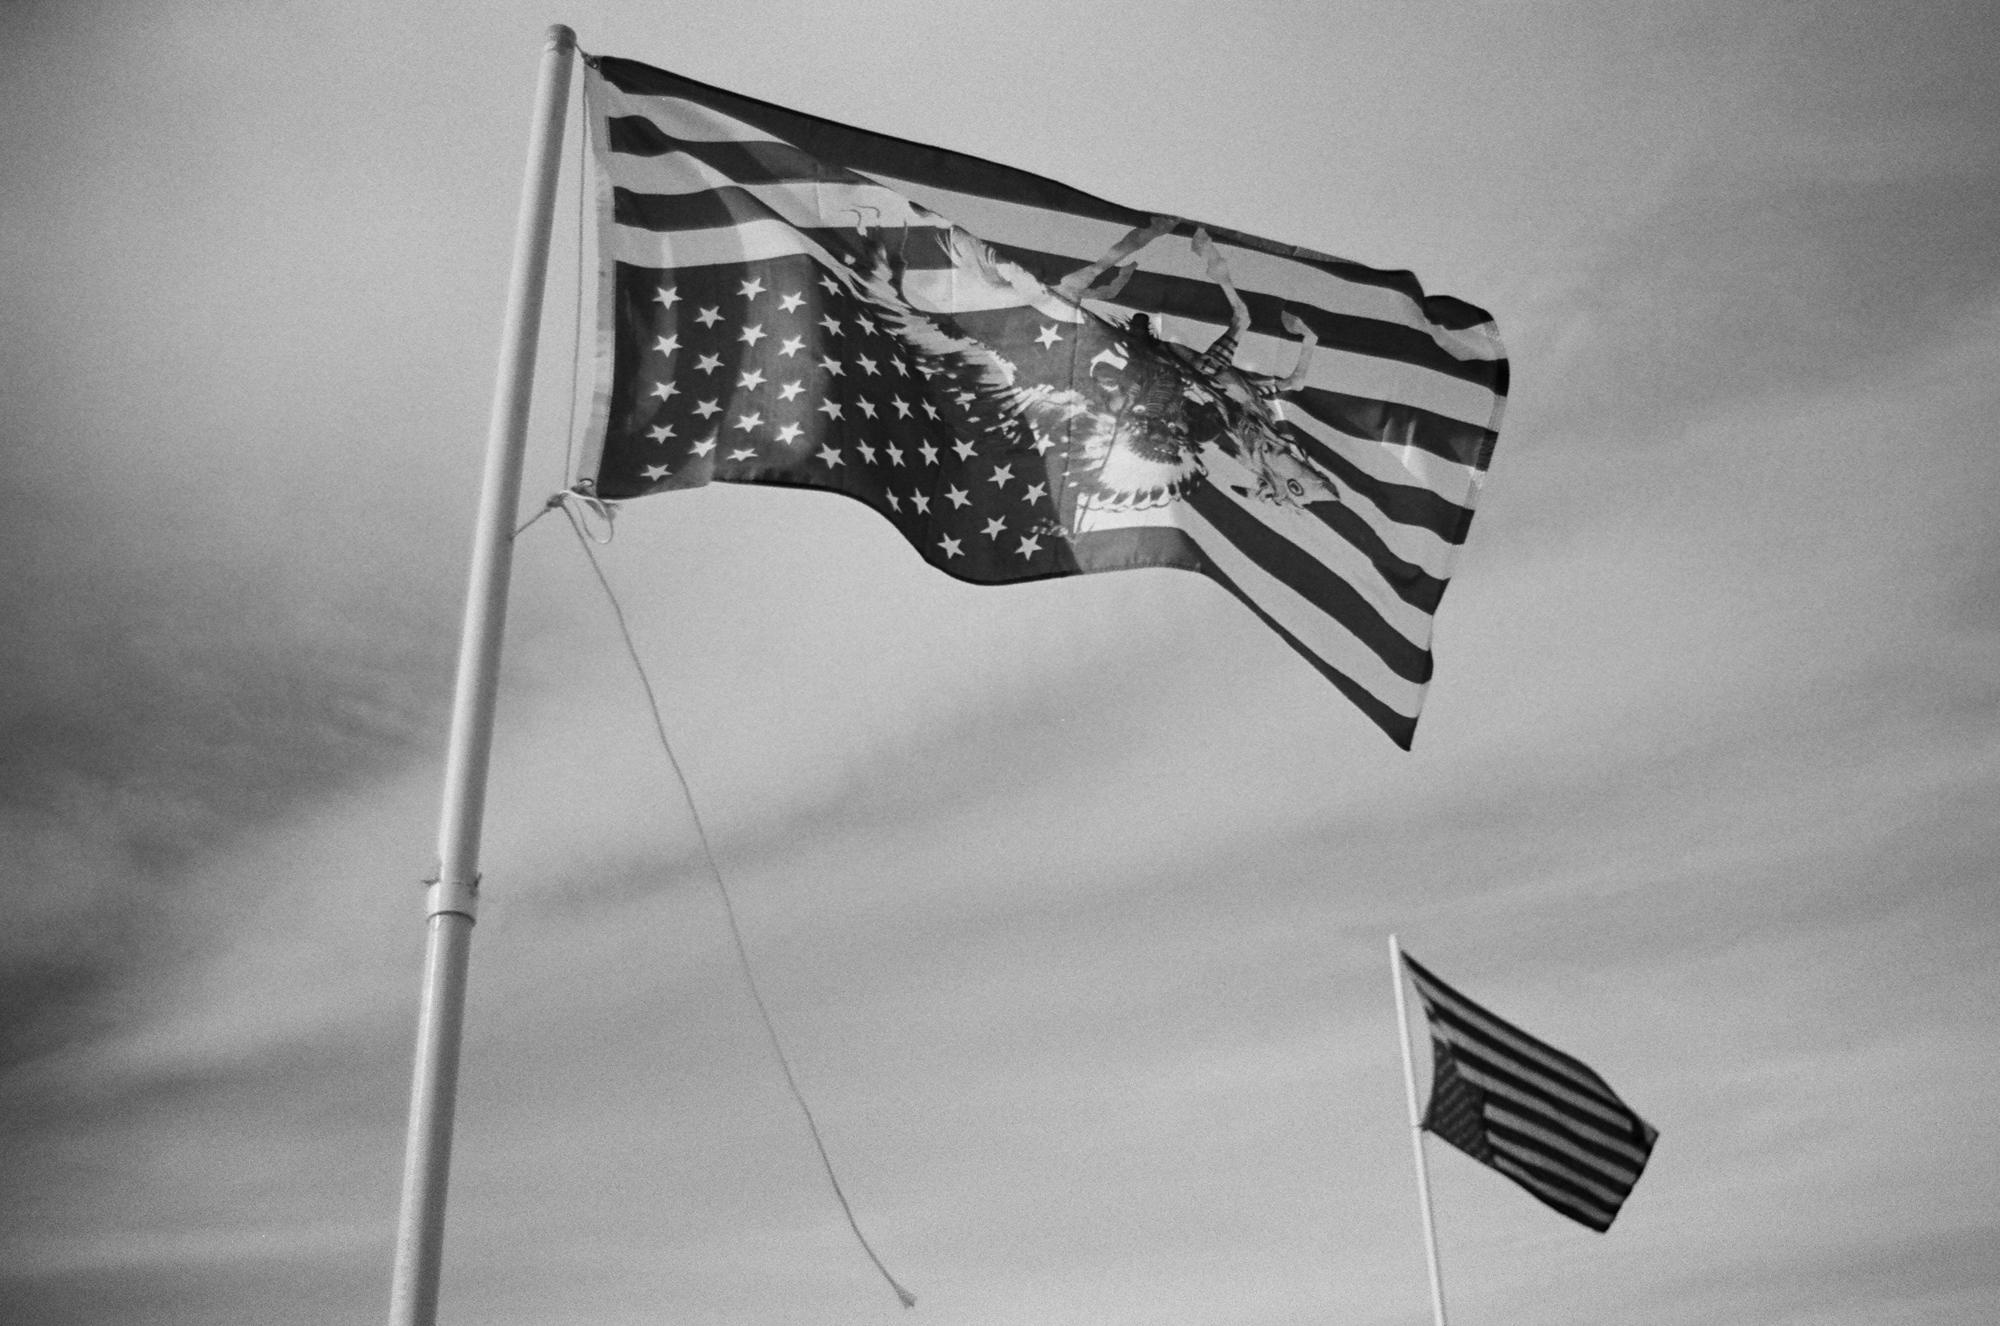 Standing Rock - Two inverted flags fly above the main Oceti Sakowin Camp...